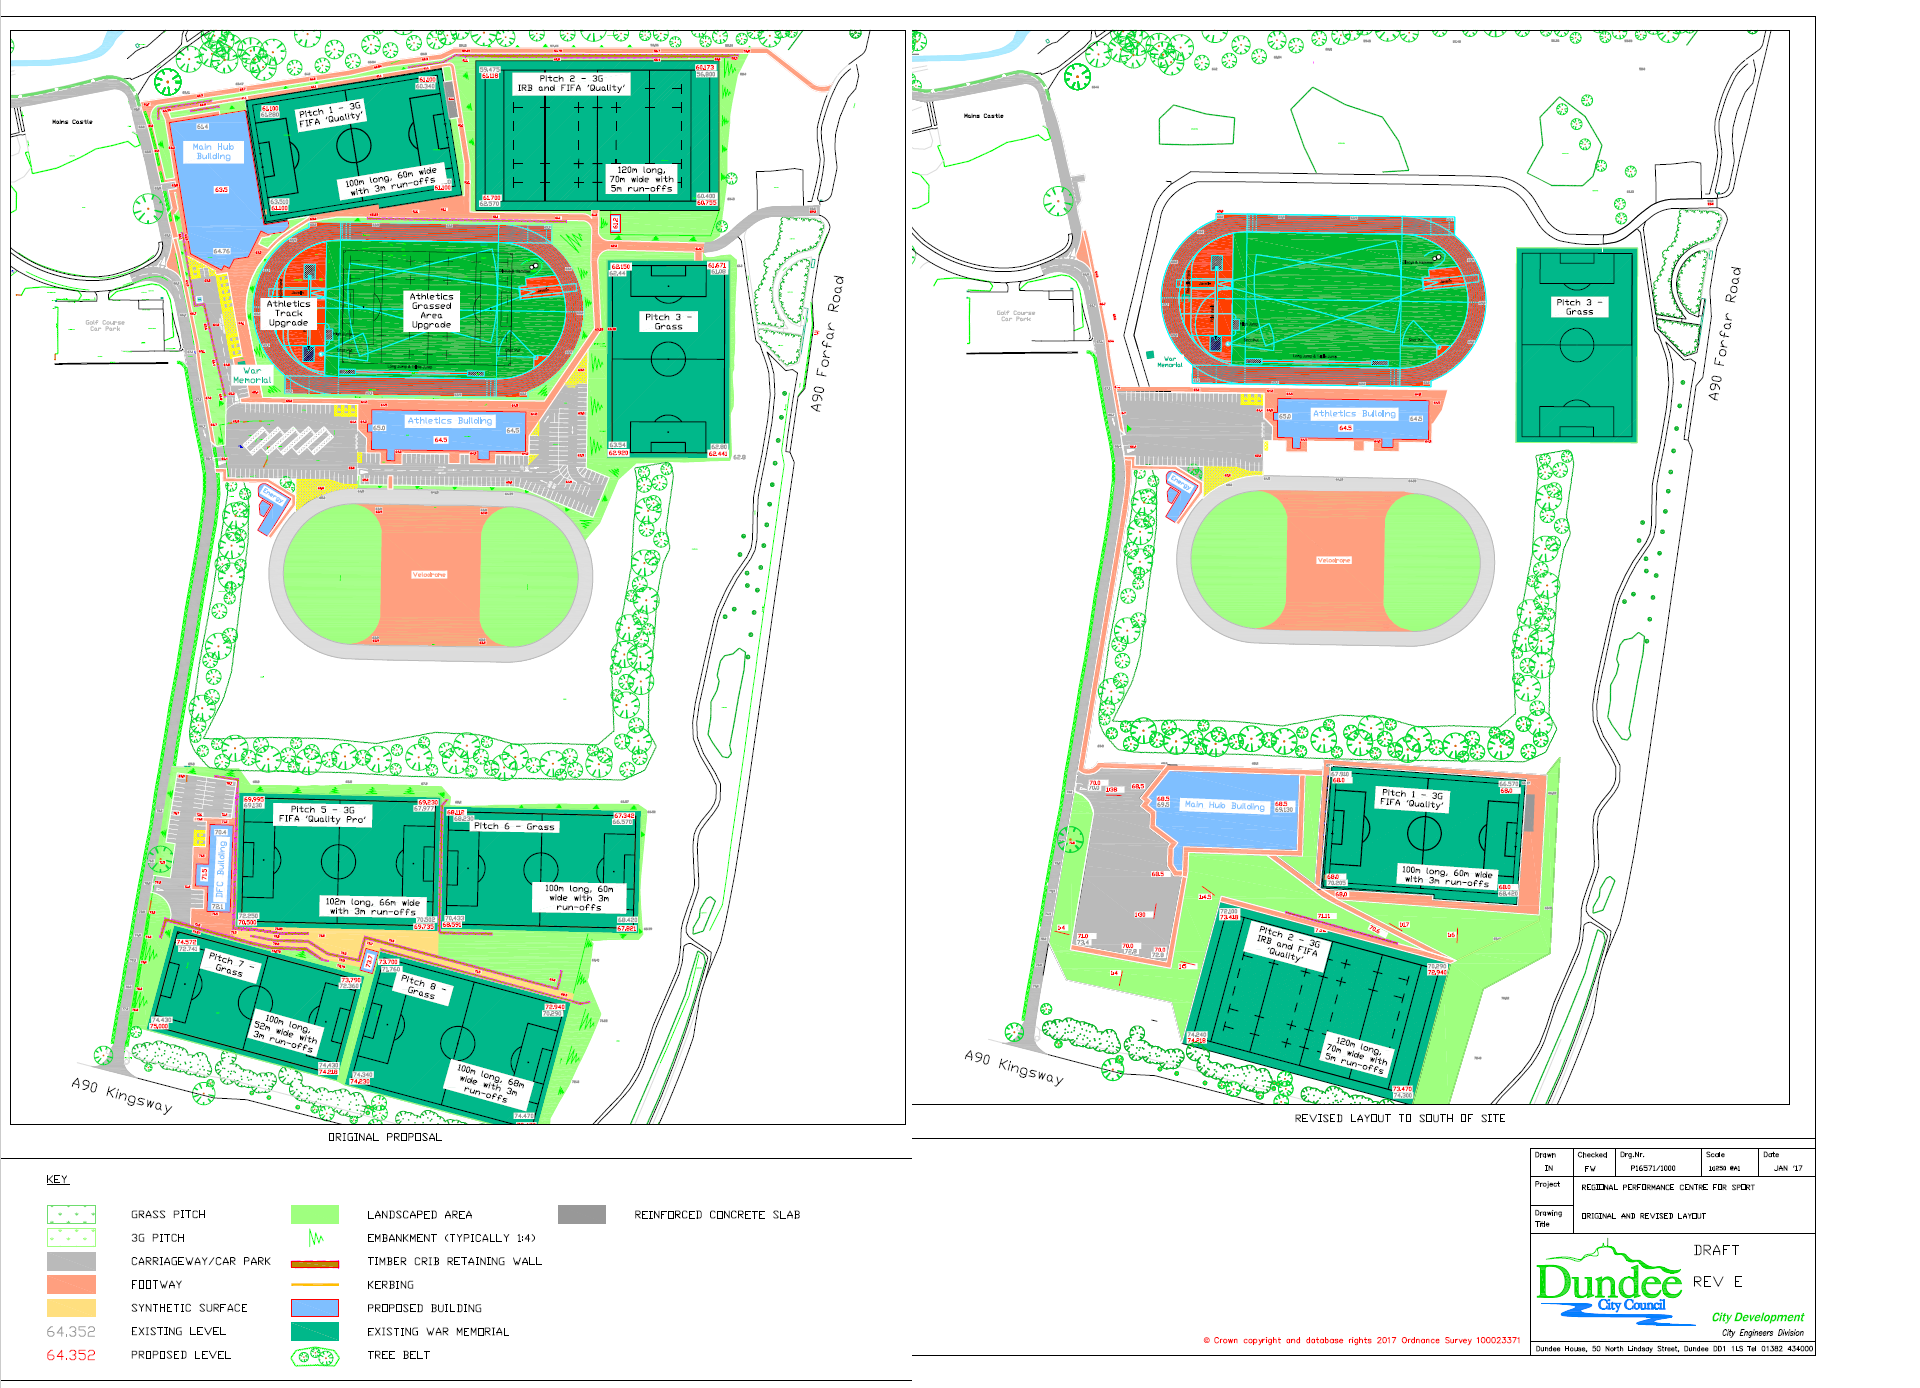 The original plans, left, and the updated plans, right.